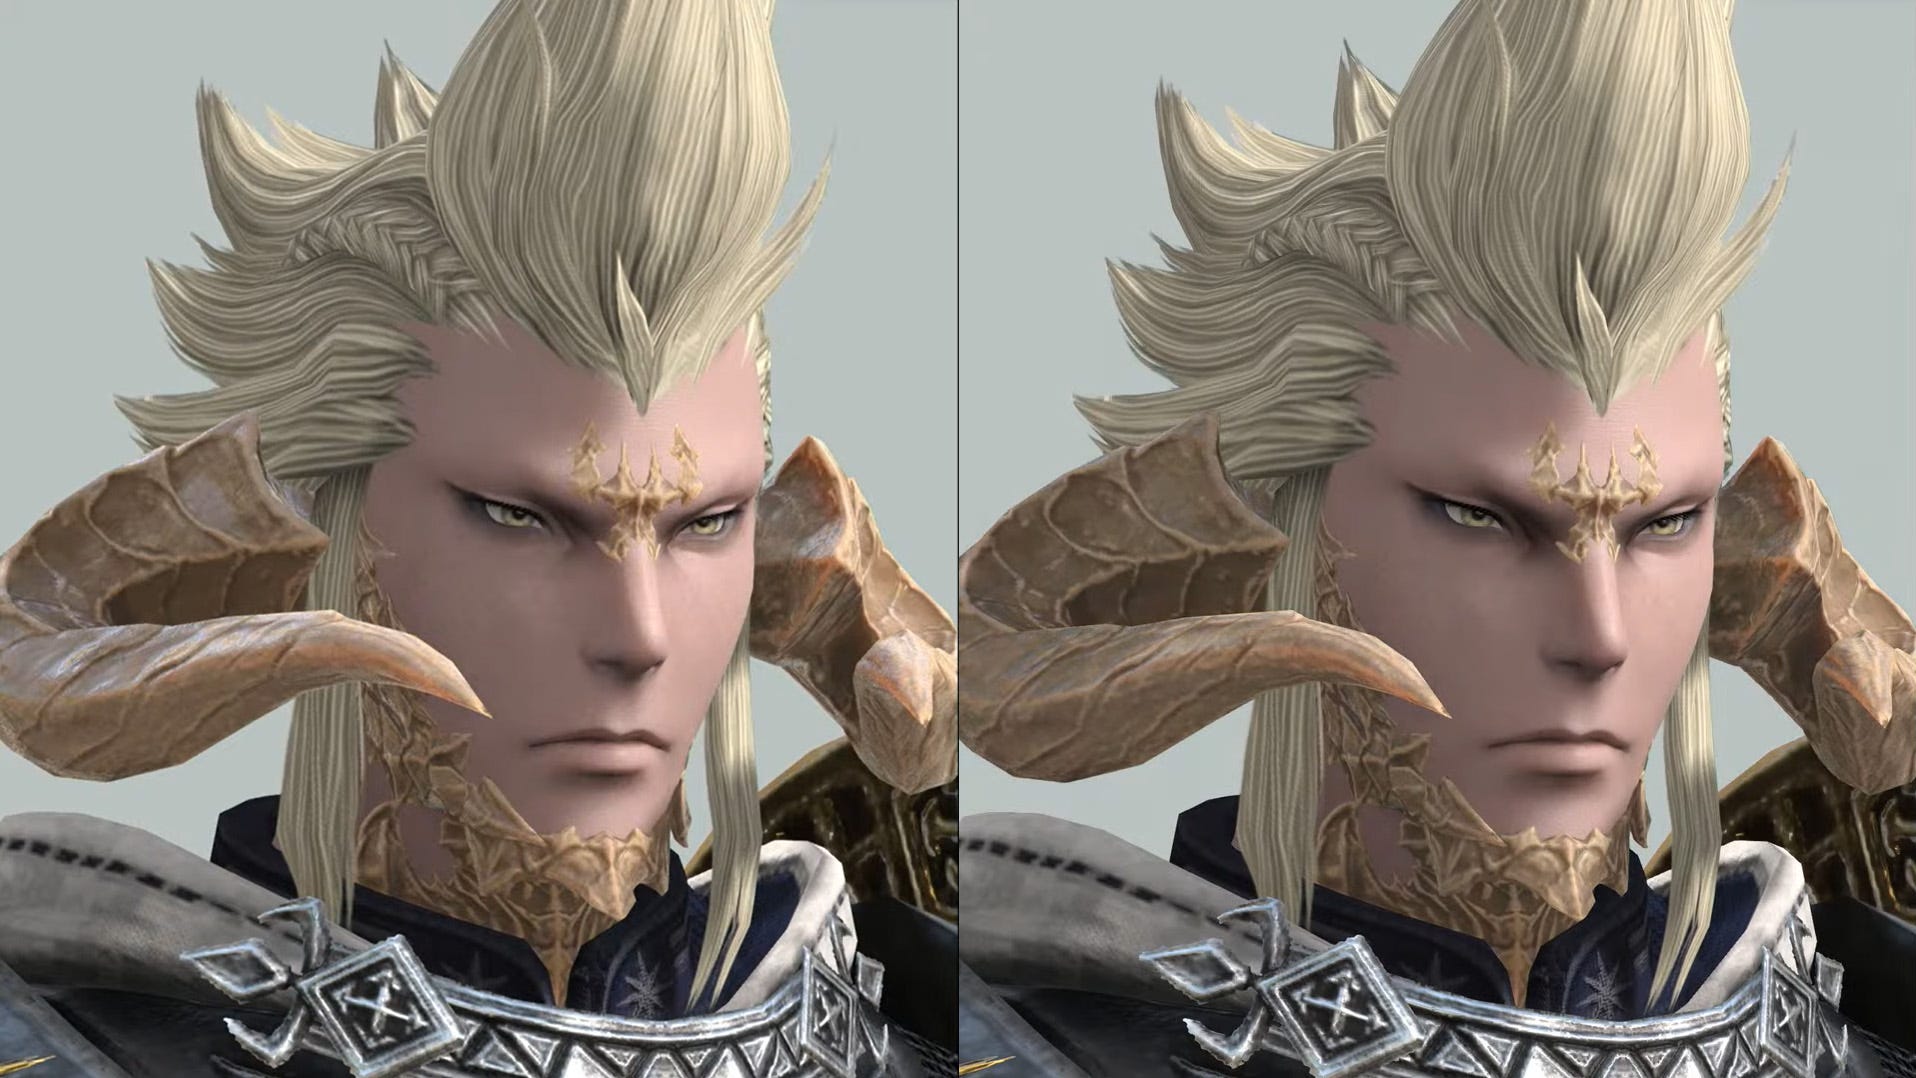 A before/after comparison of different graphical renders of an Au Ra player character.